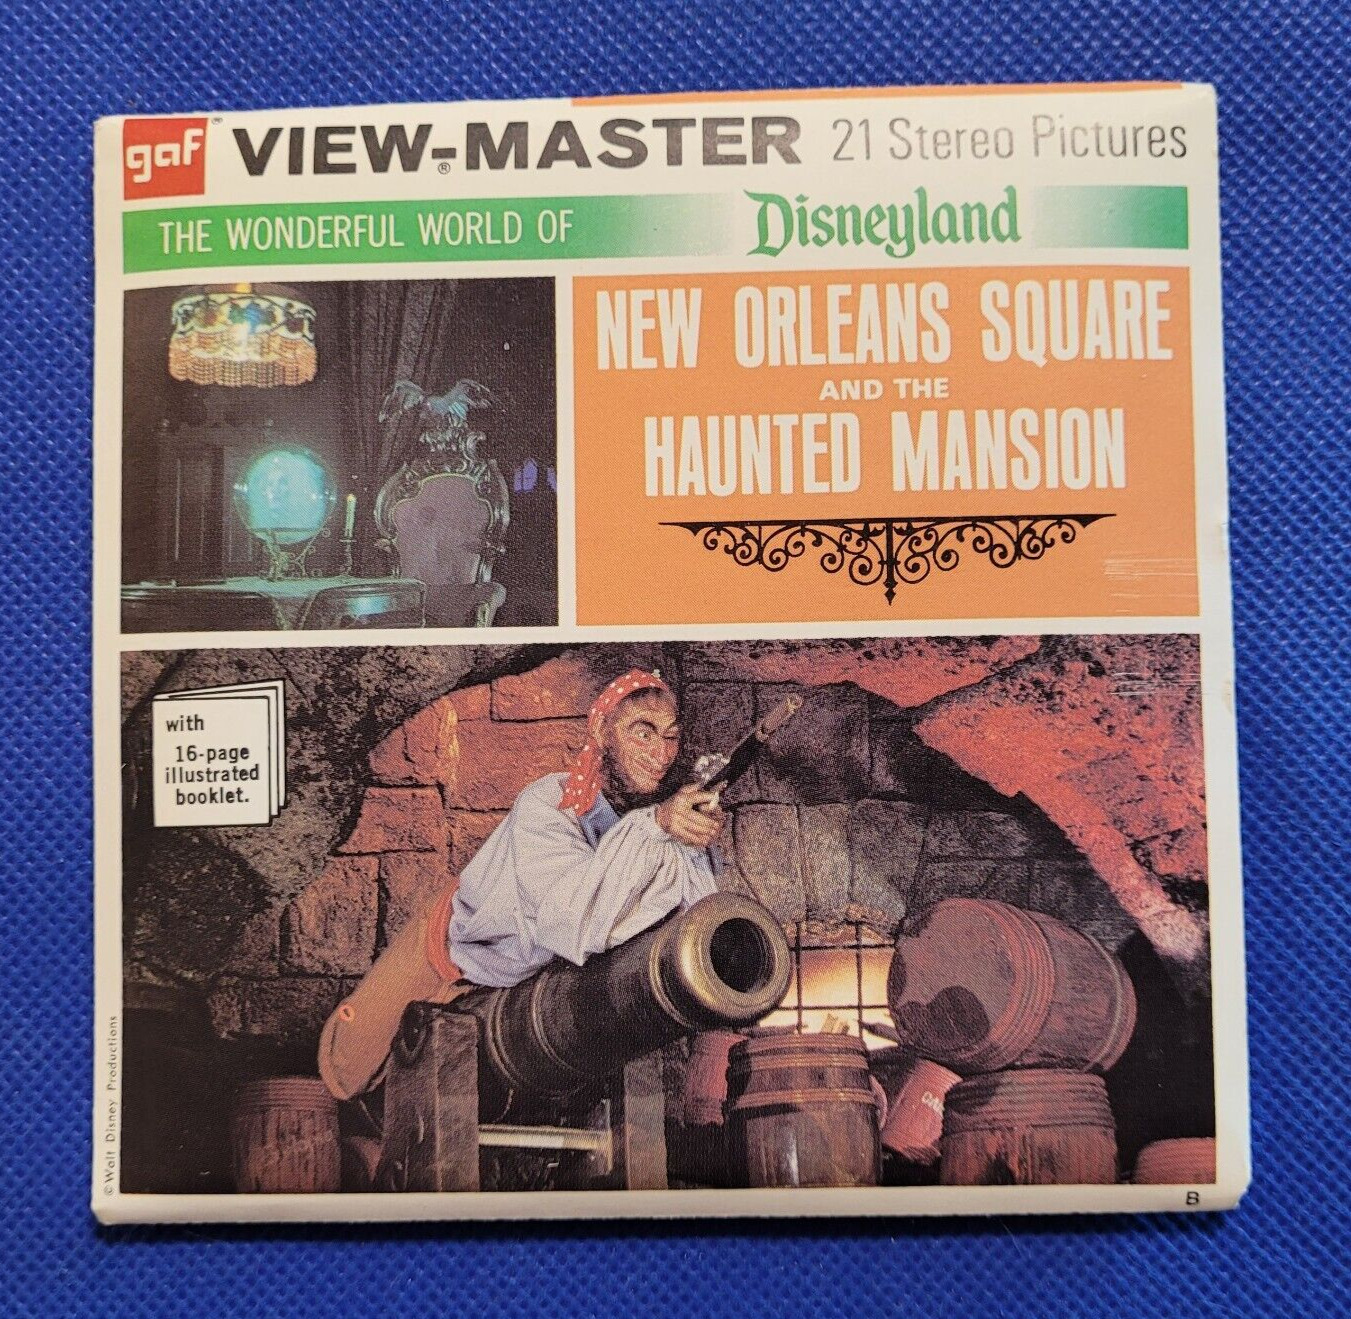 Gaf A180 Disneyland New Orleans Square Haunted Mansion view-master Reels Packet